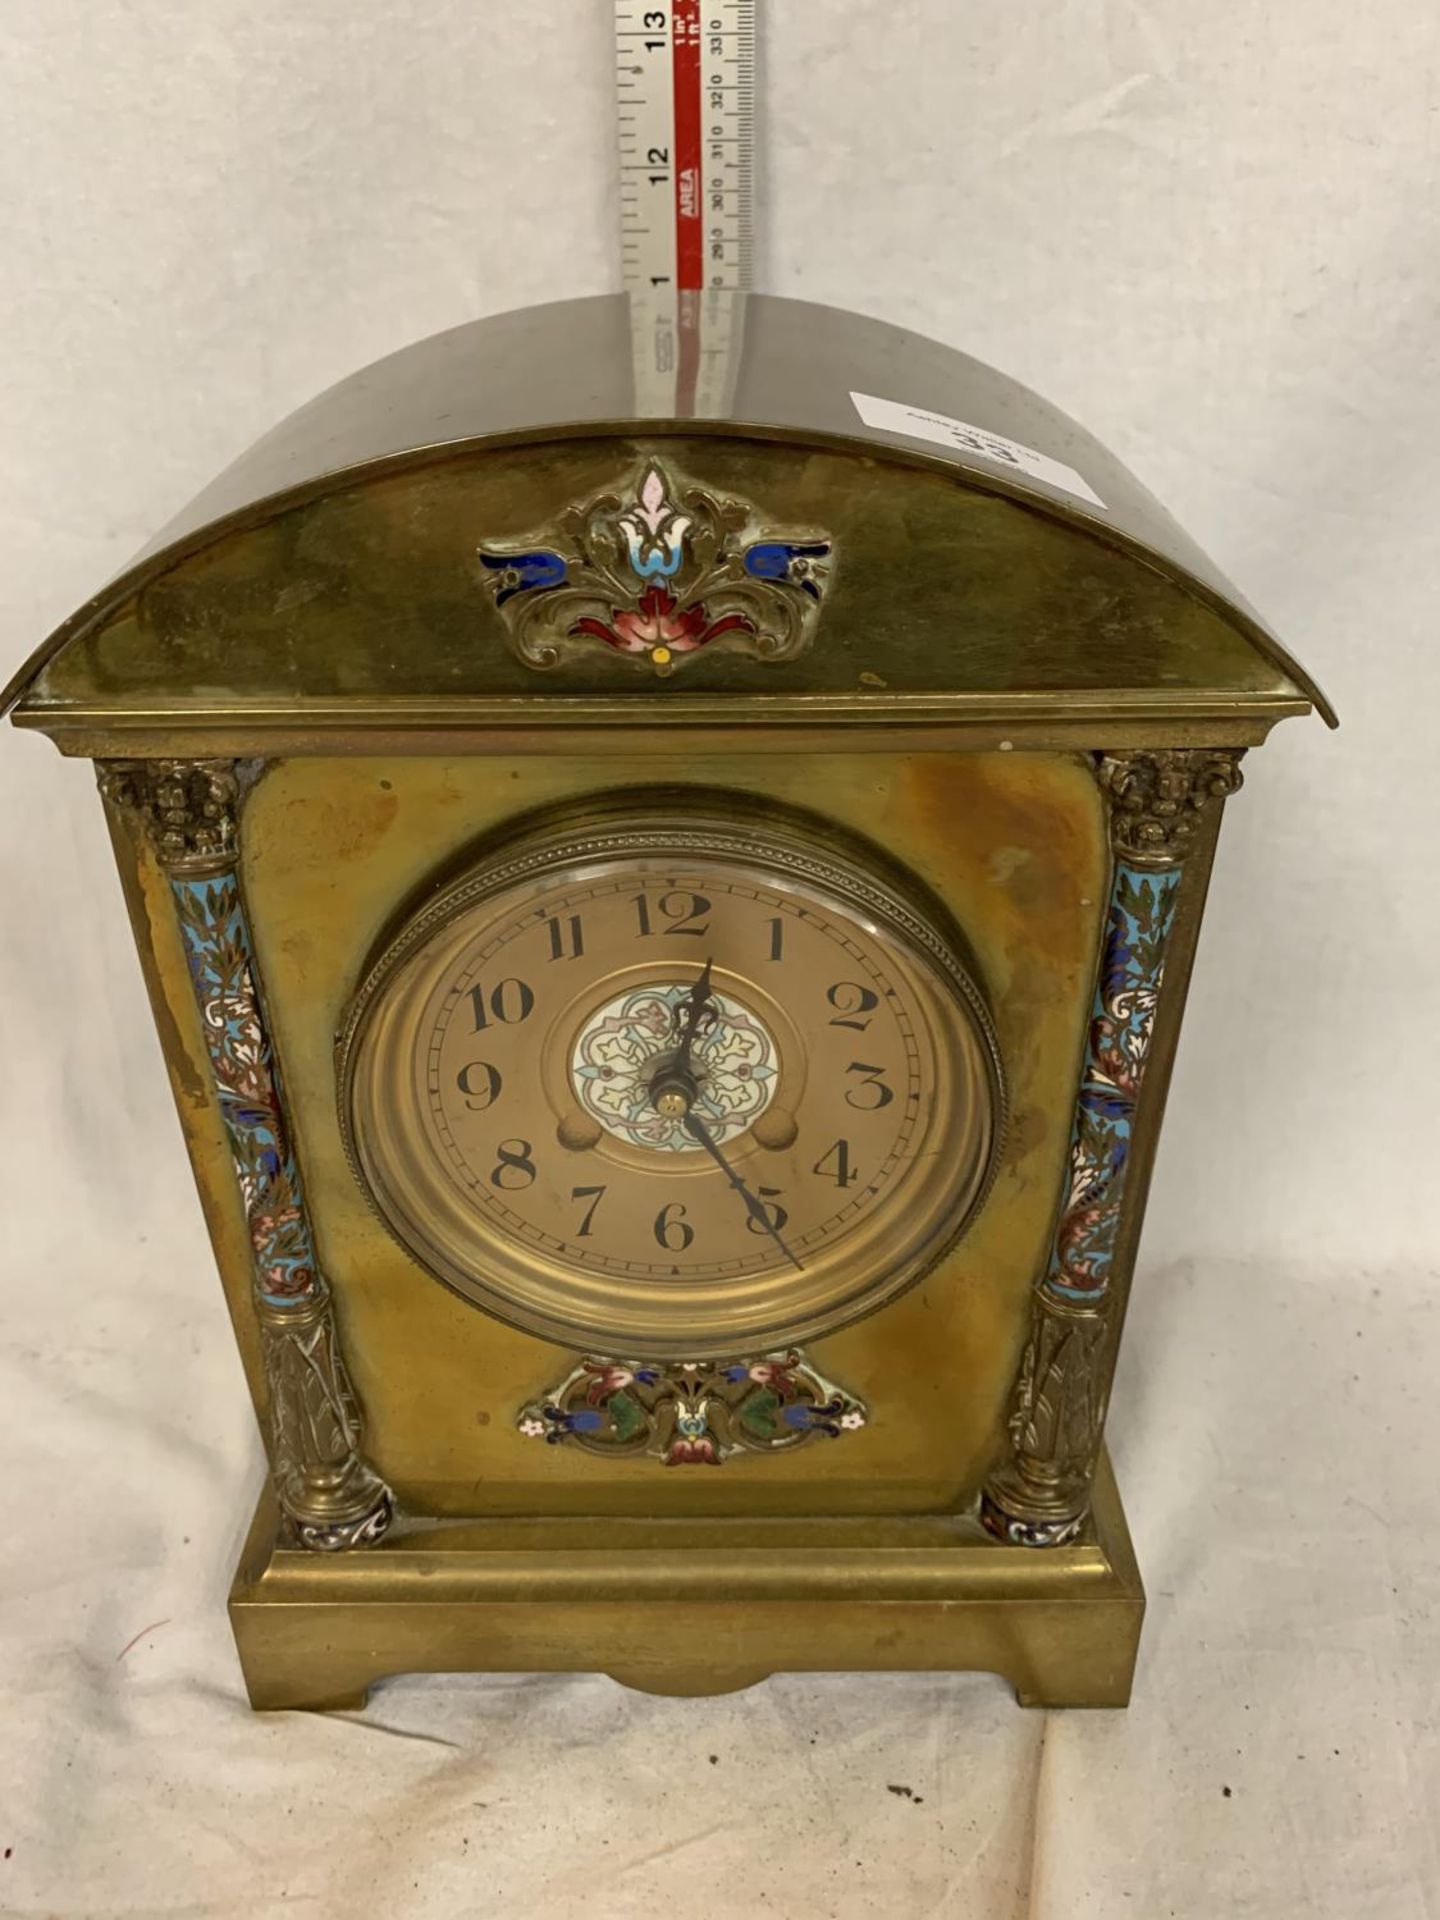 A LATE 19TH CENTURY BRASS CLOCK MOUNT AND DIAL WITH ART NOUVEAU COLOURED FLORAL ENAMEL DECORATION - Image 2 of 6